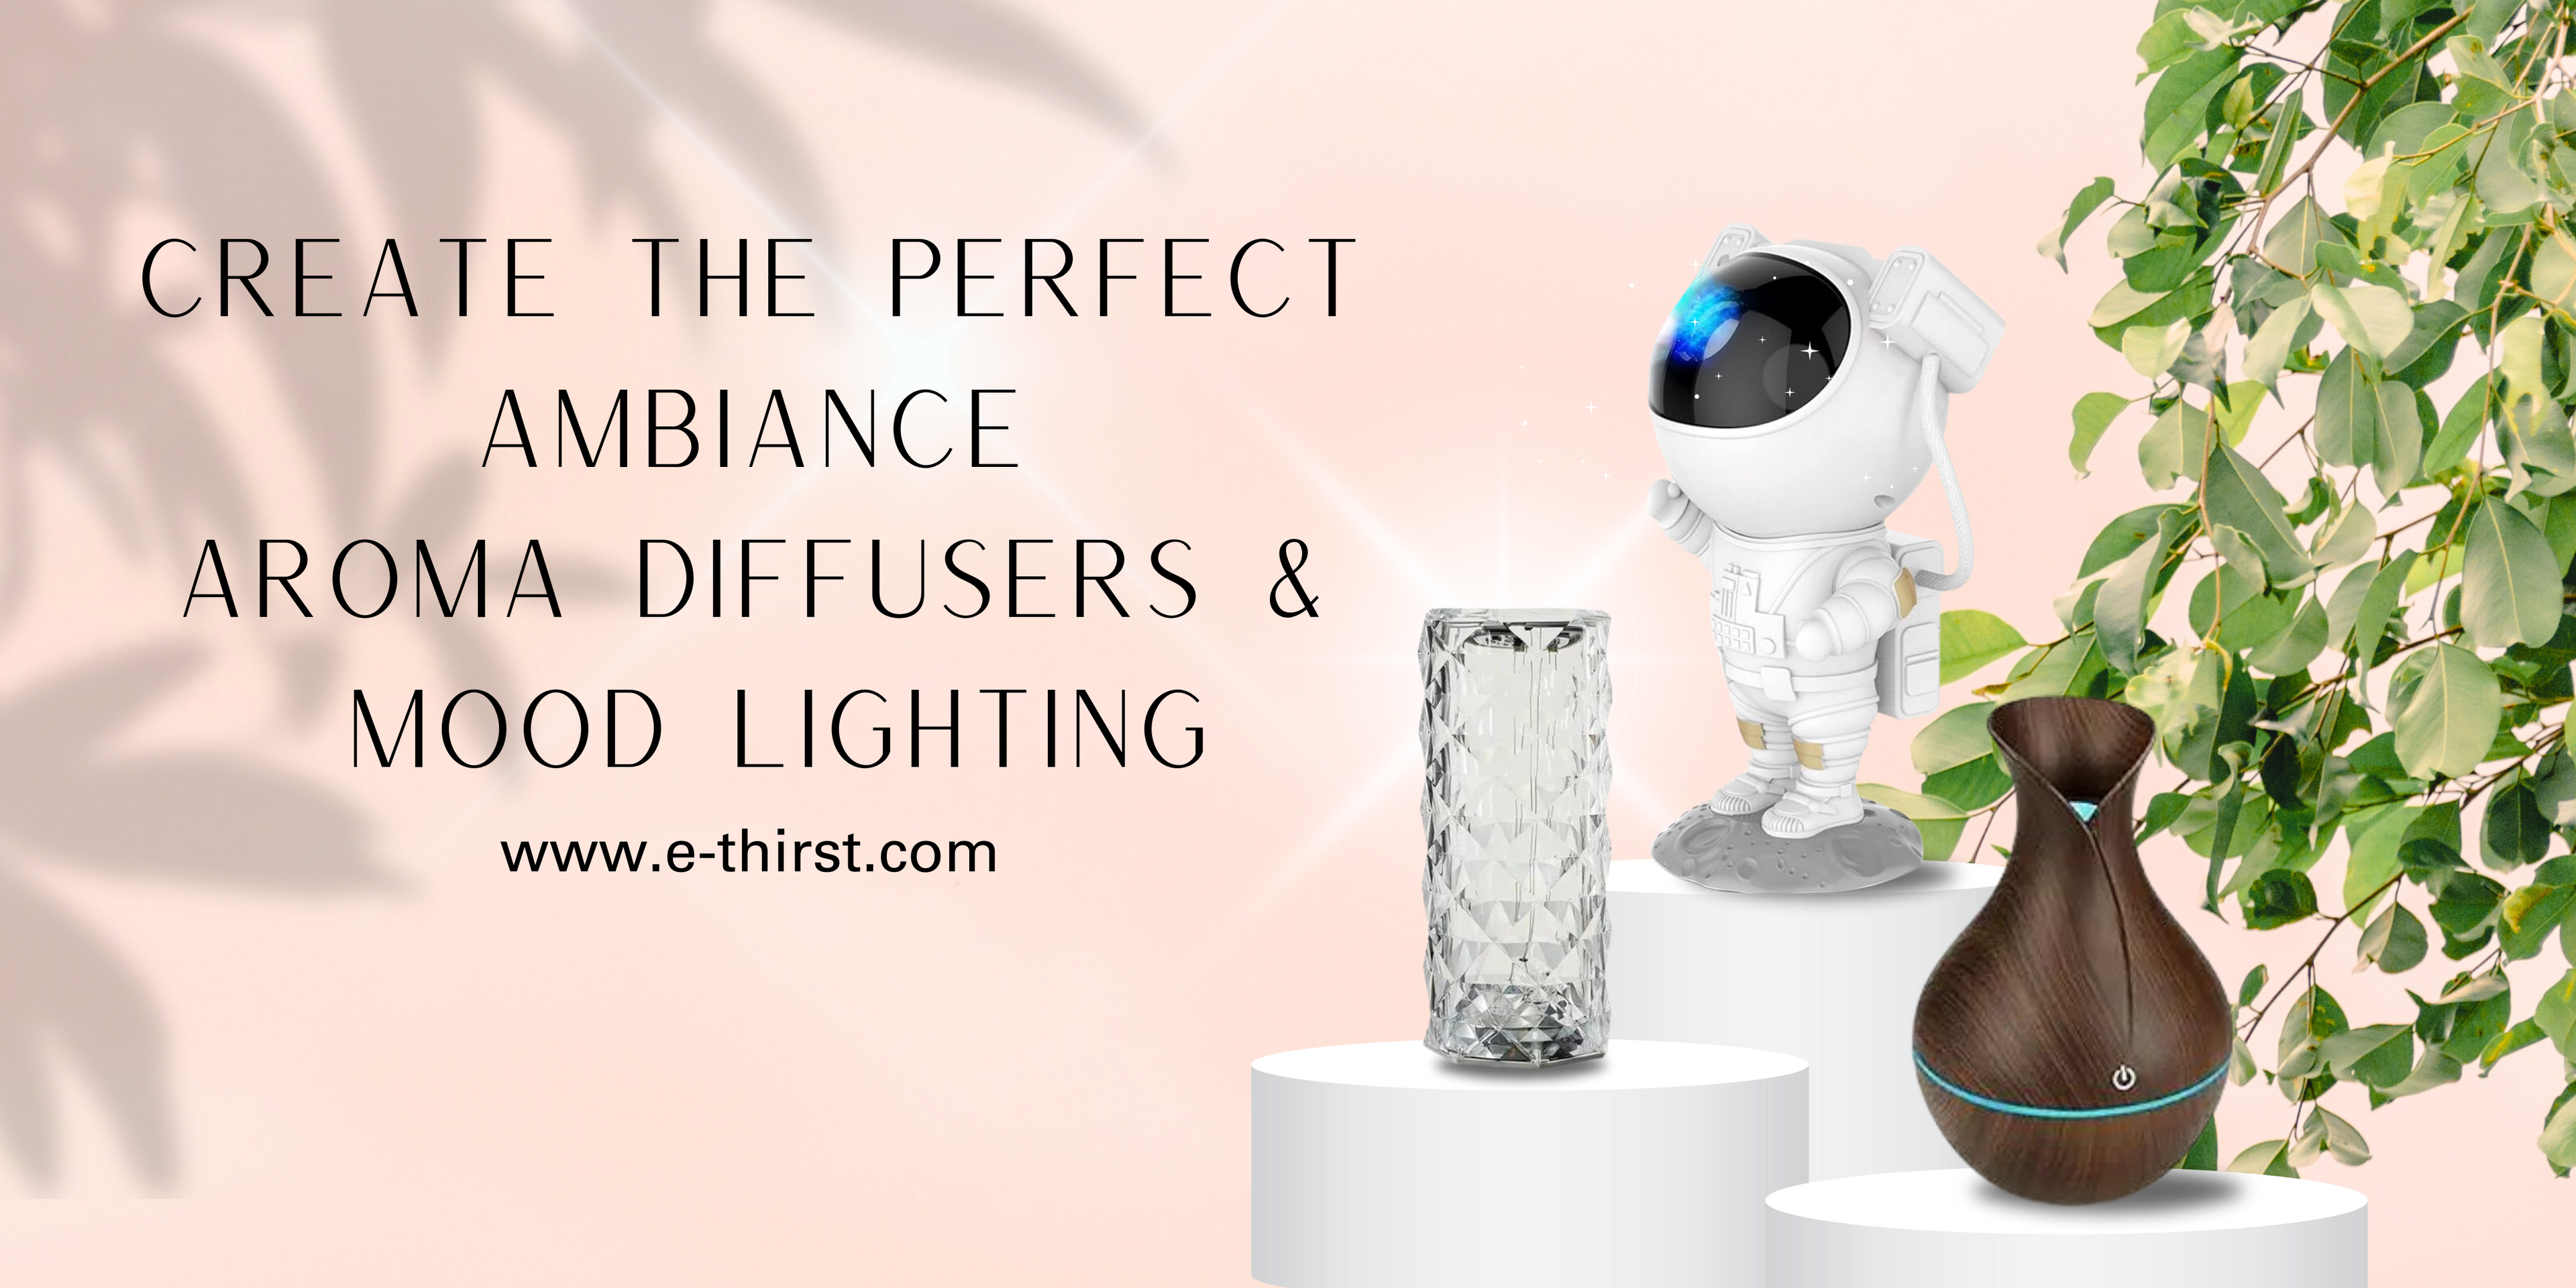 Aromatherapy diffuser humidifier enhancing room air quality with essential oils. Elegant aromatherapy humidifier diffusing relaxing scents in a living space.